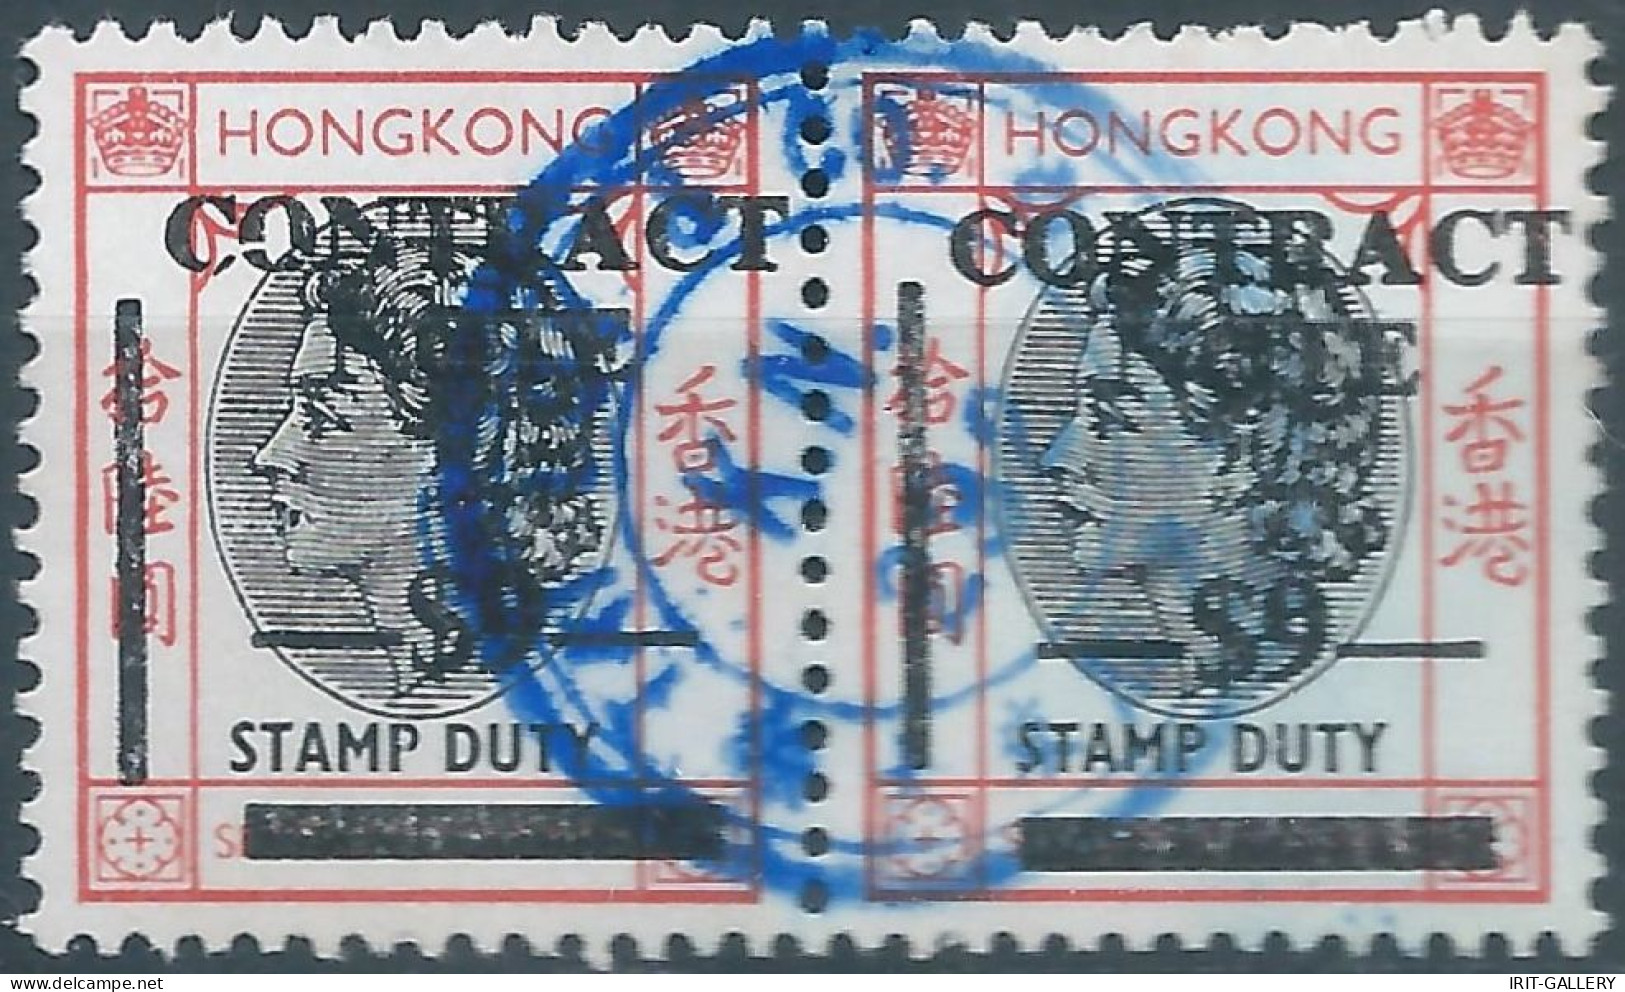 Great Britain-ENGLAND,HONG KONG Revenue Stamp DUTY Contract $9 In Pairs With The Central Cancelled - Post-fiscaal Zegels